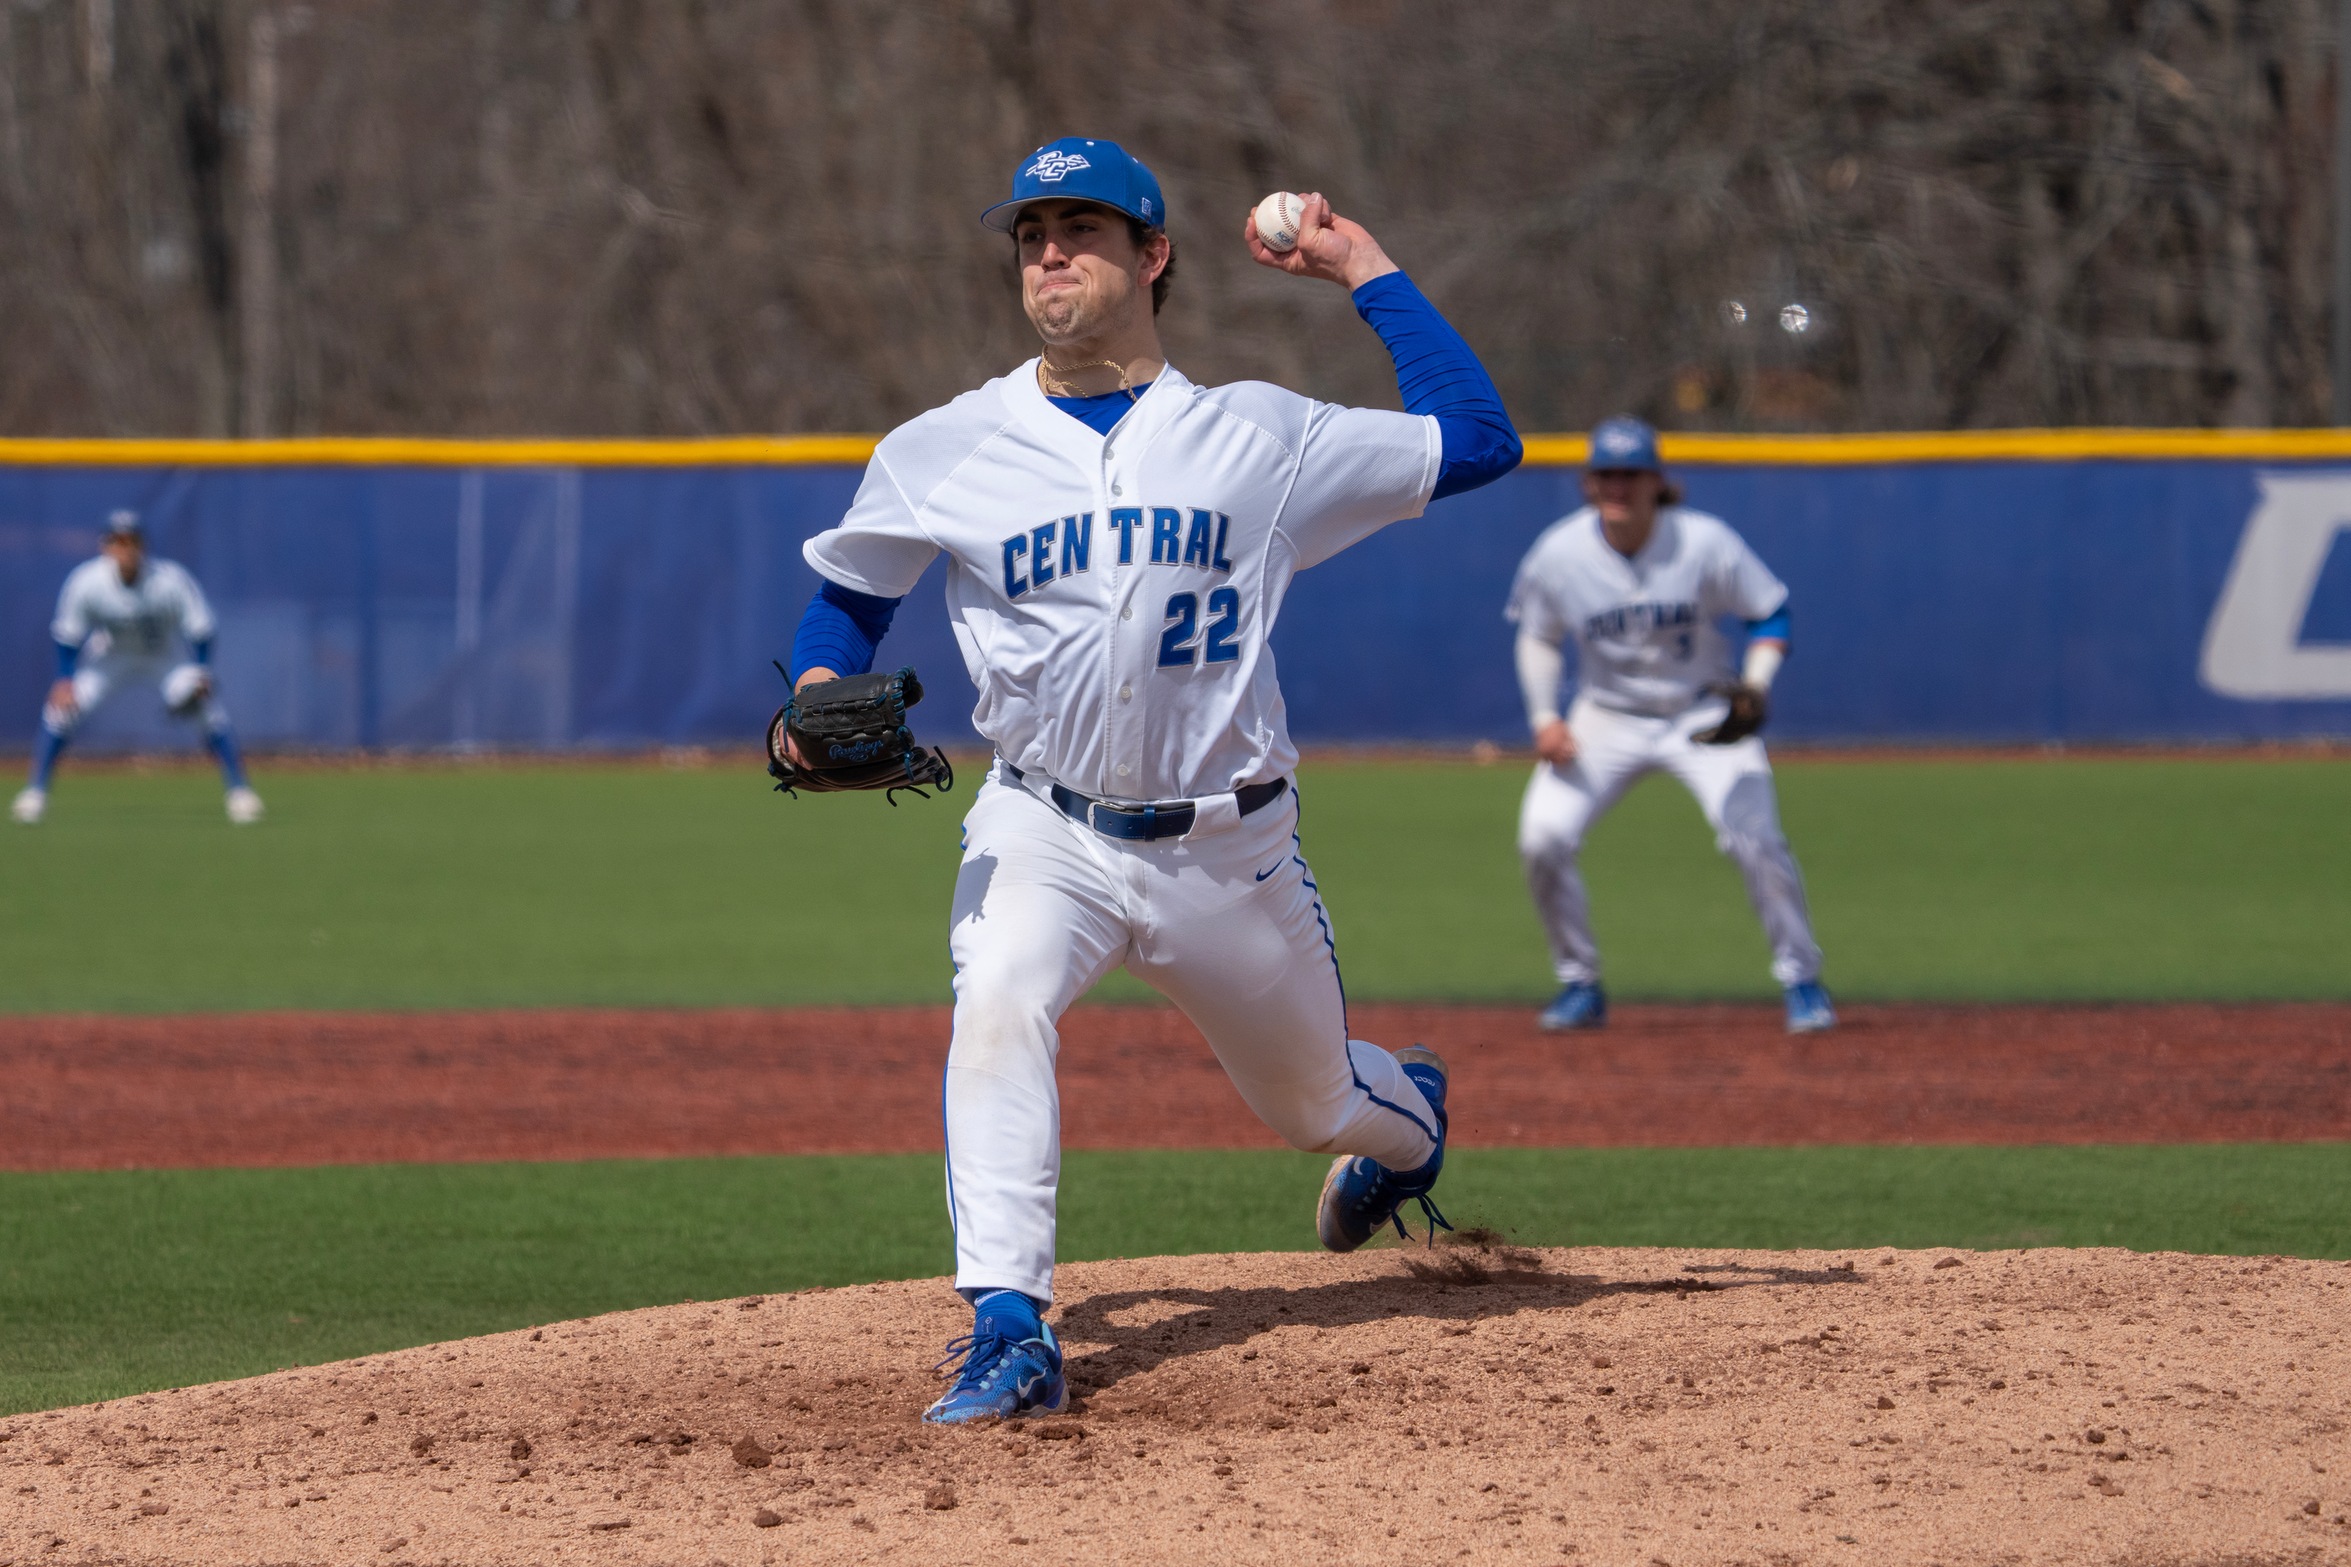 Dominic Niman tossed a complete game in Friday's win. (Steve McLaughlin Photography)